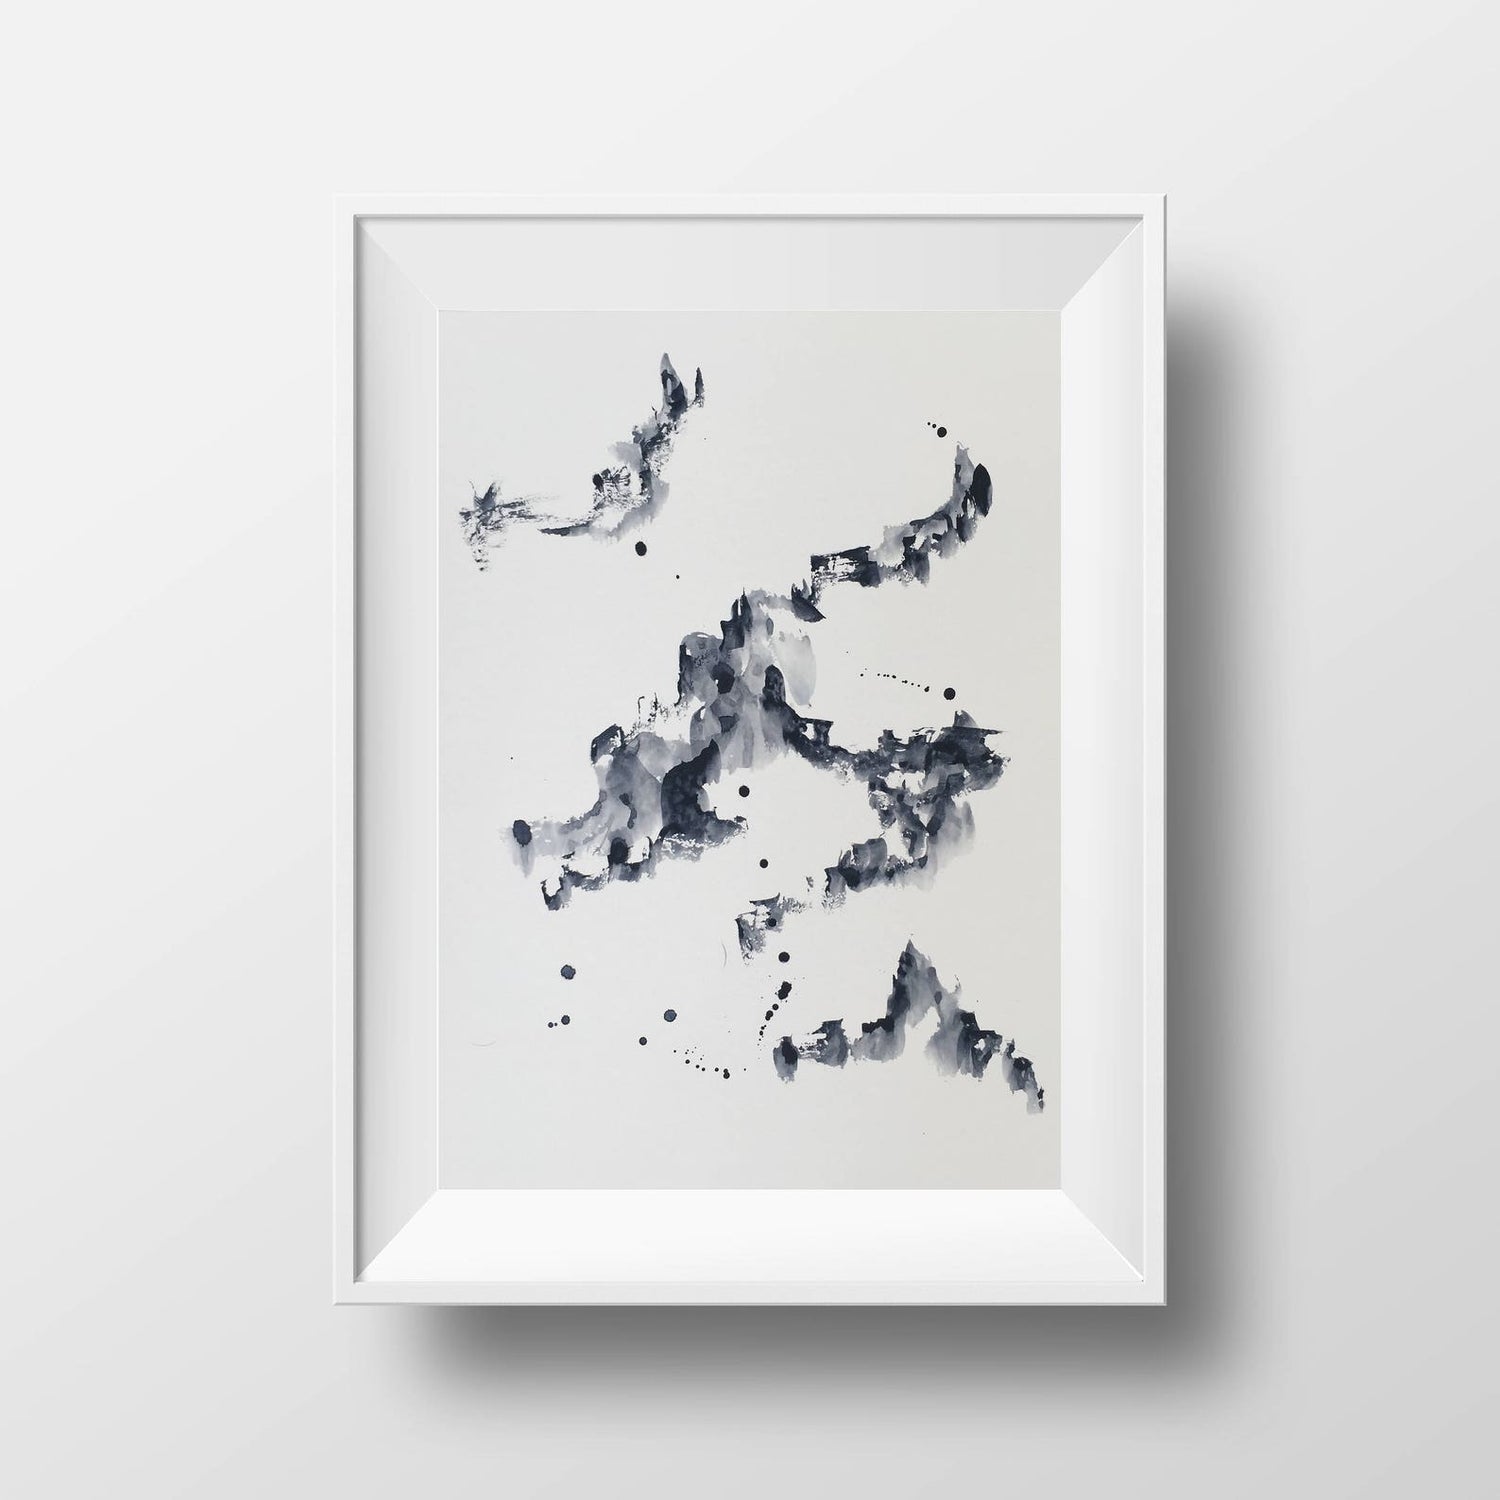 Iya Gallery watercolour print inspired by characteristics of the wabi-sabi aesthetic: simplicity & tranquility hoping to bring serenity & calmness into people's lives & homes